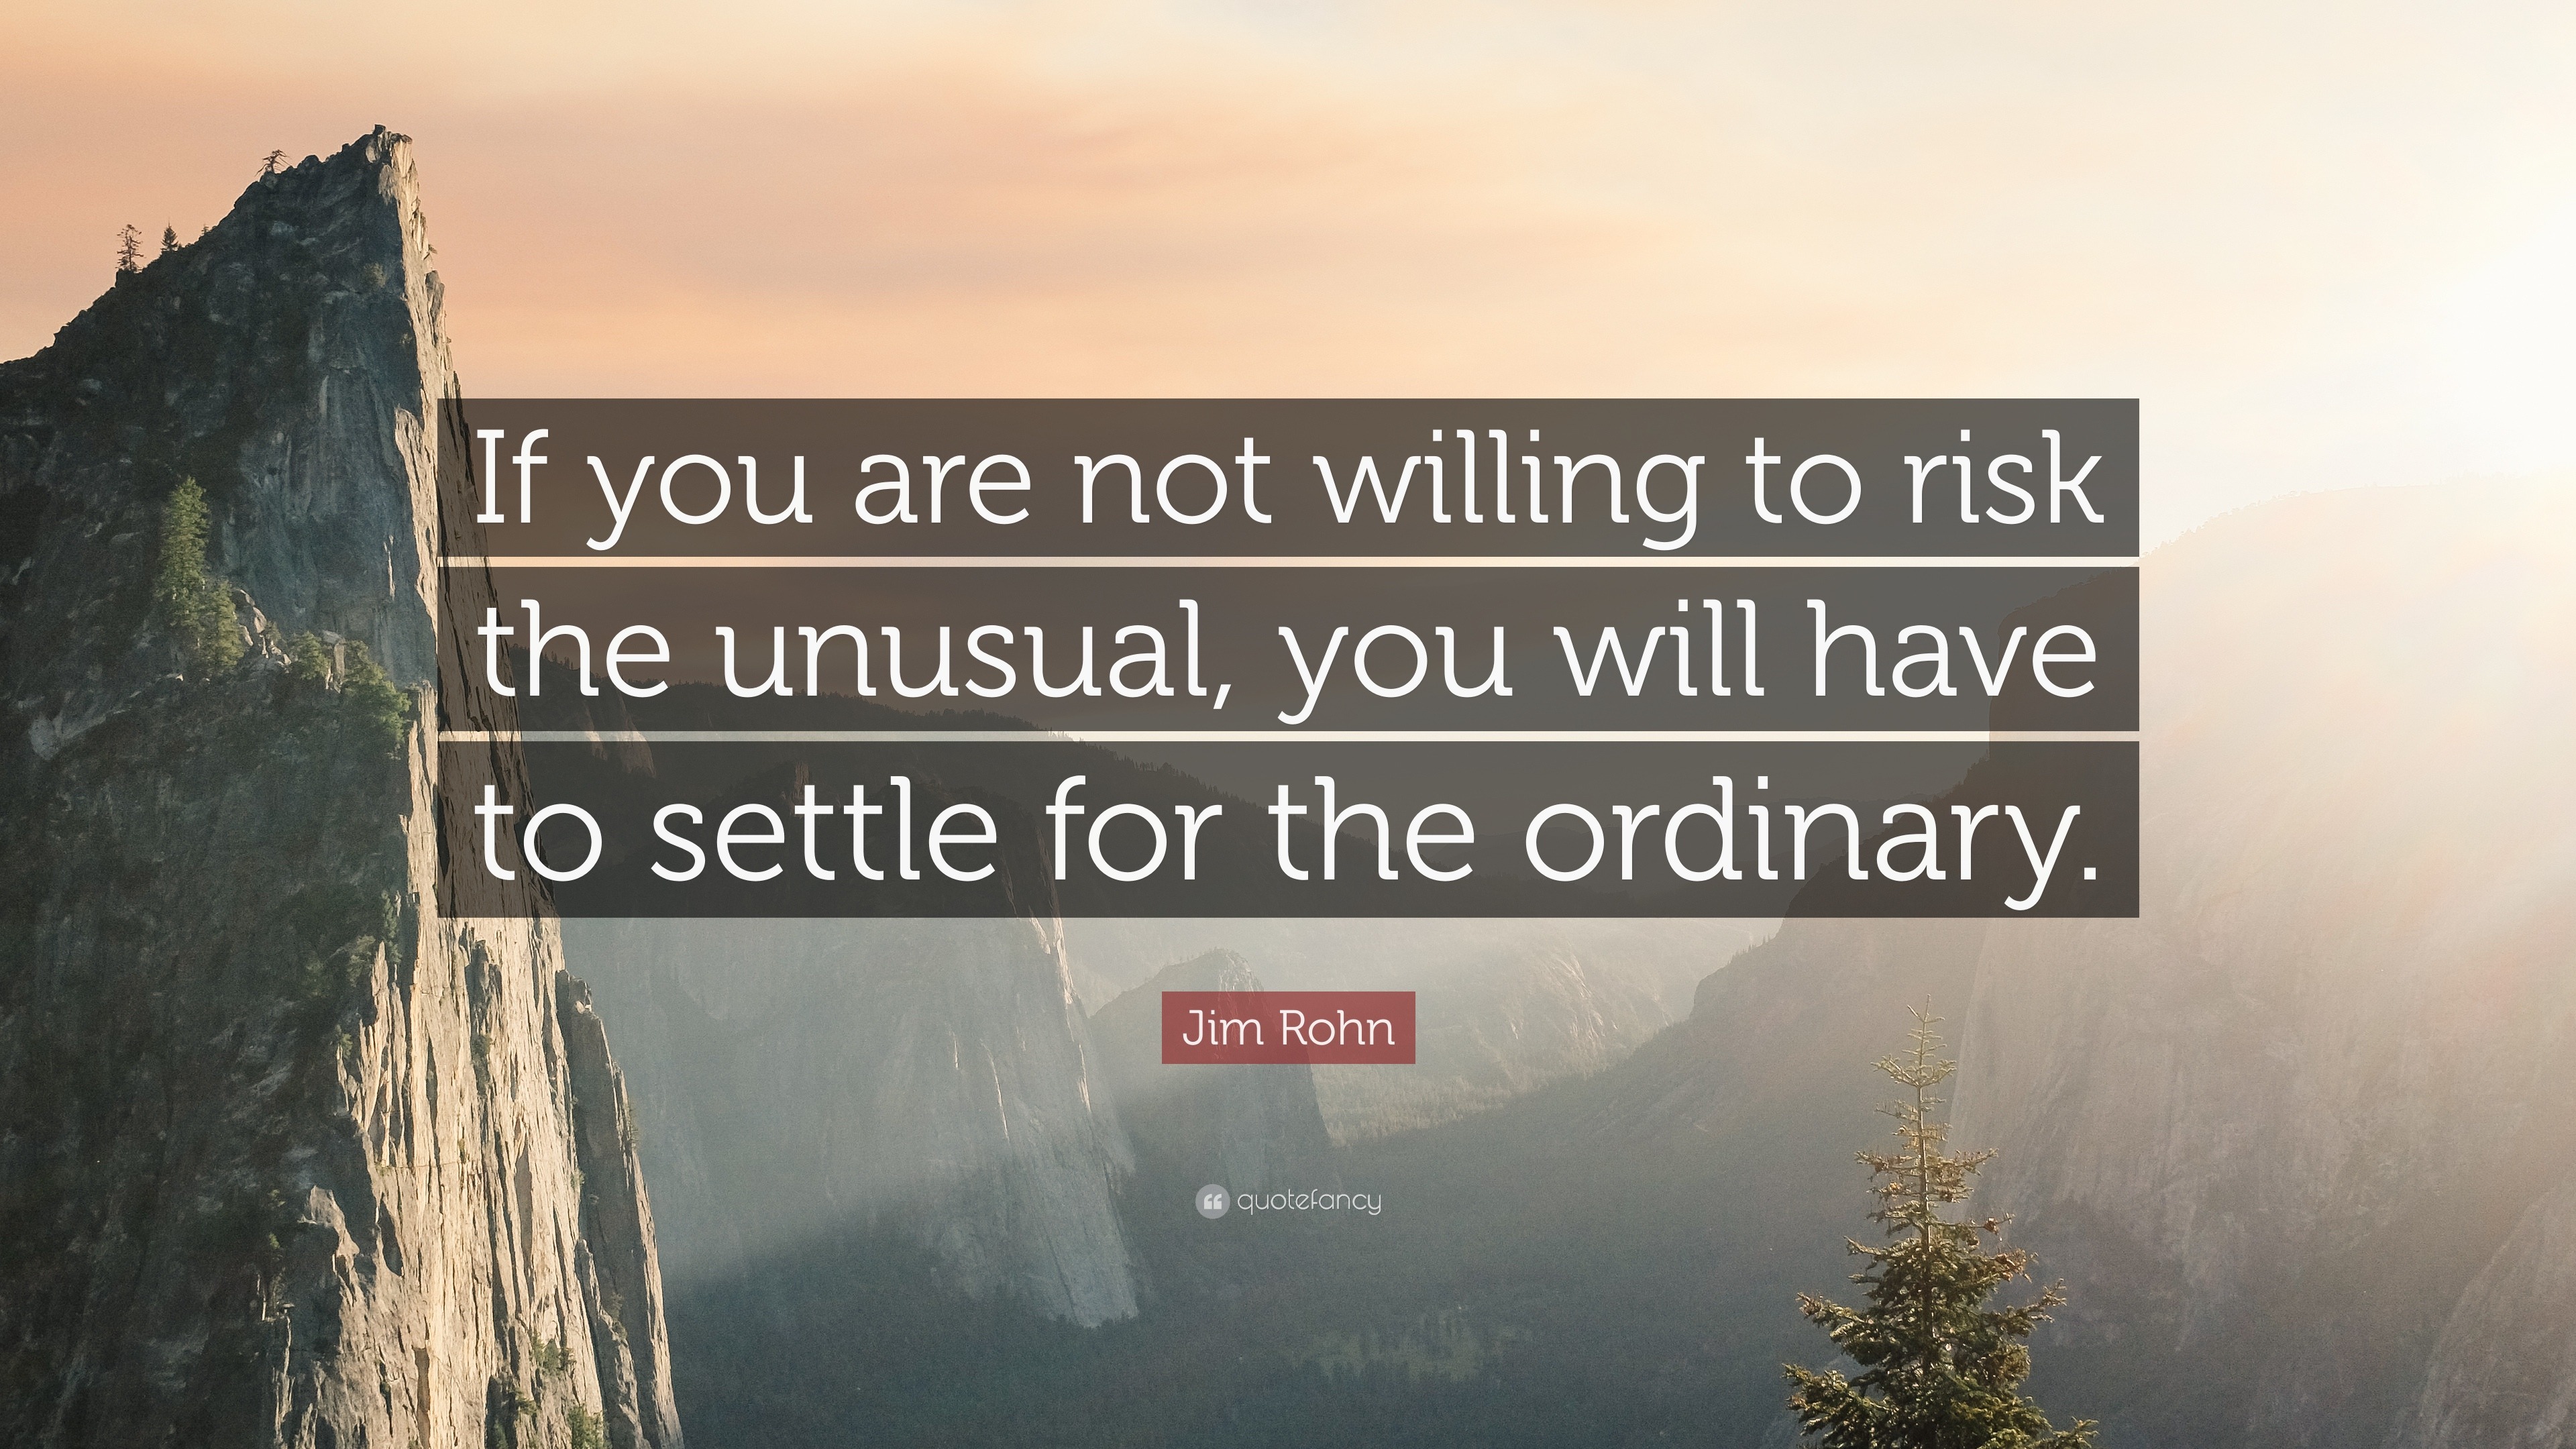 14060-Jim-Rohn-Quote-If-you-are-not-willing-to-risk-the-unusual-you-will.jpg